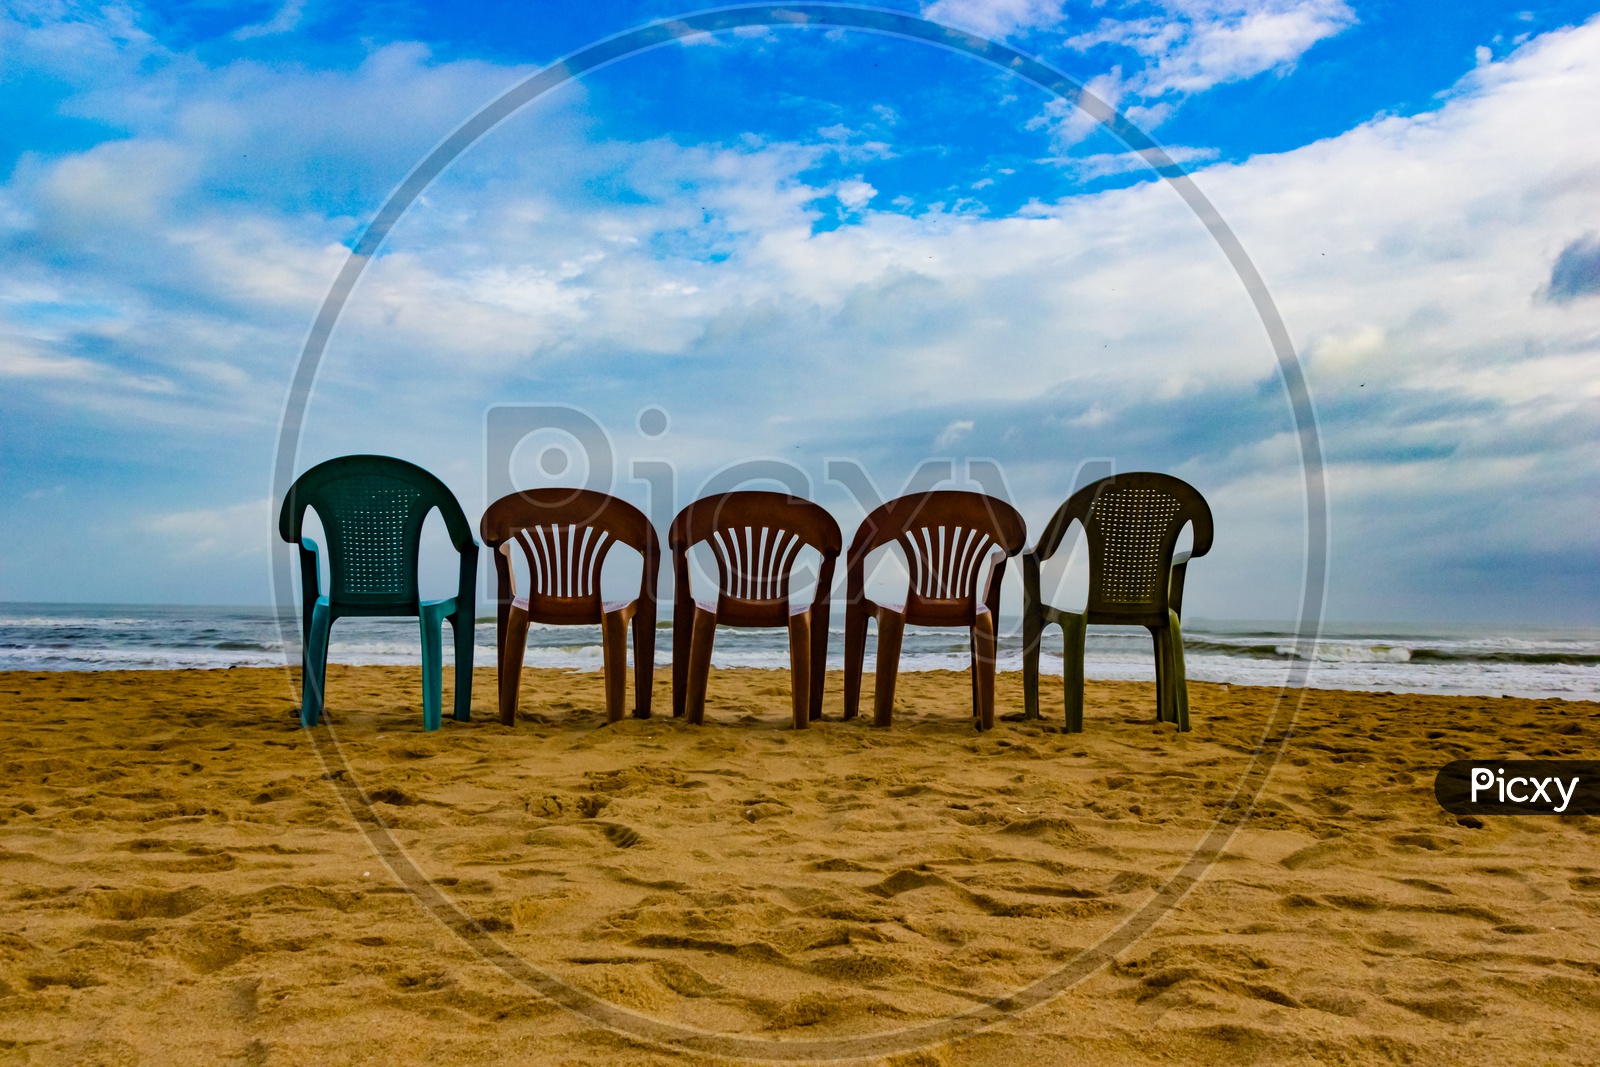 Five Multi Cloured Chair On A Sandy Beach With Blue Sky In A Sunny Day Perfect Holiday Destination